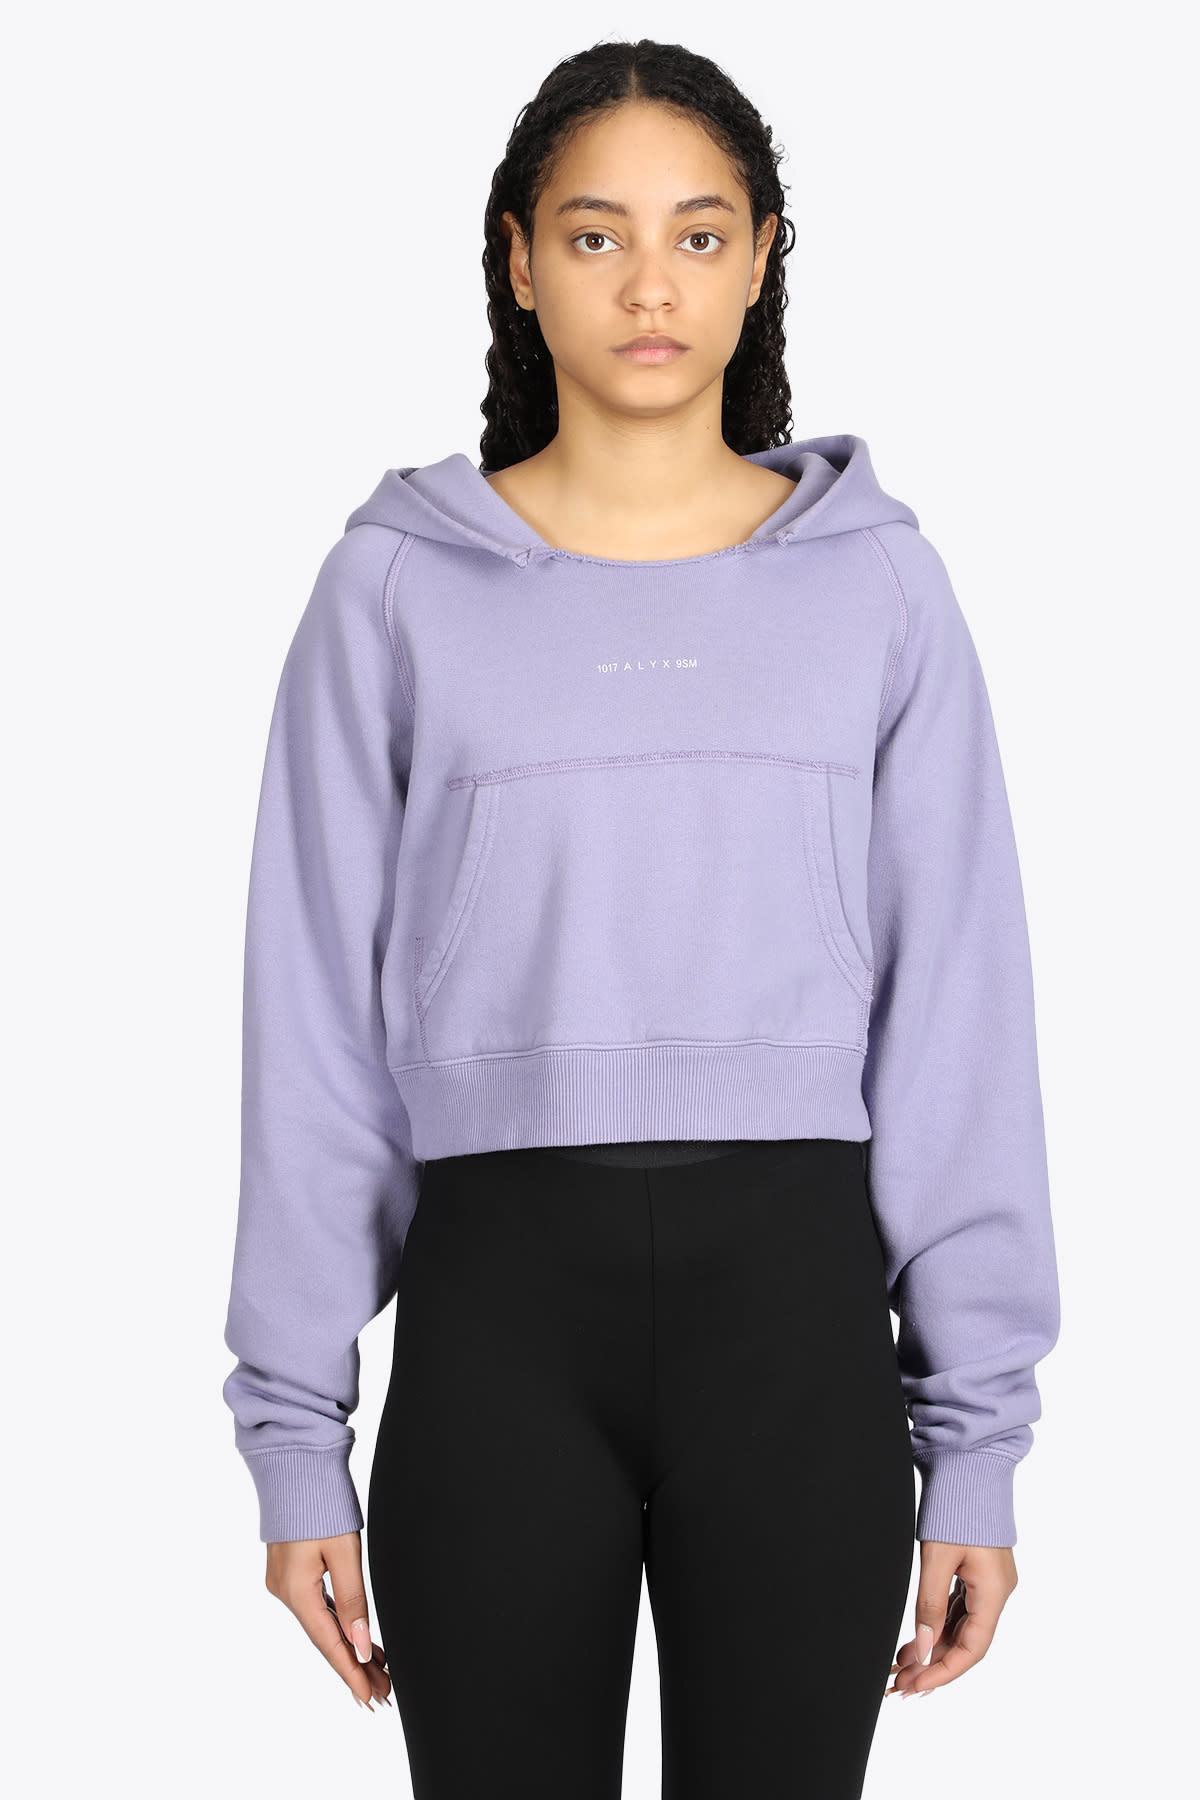 1017 ALYX 9SM Collection Logo Cropped Sweatshirt Lilac cotton cropped hoodie